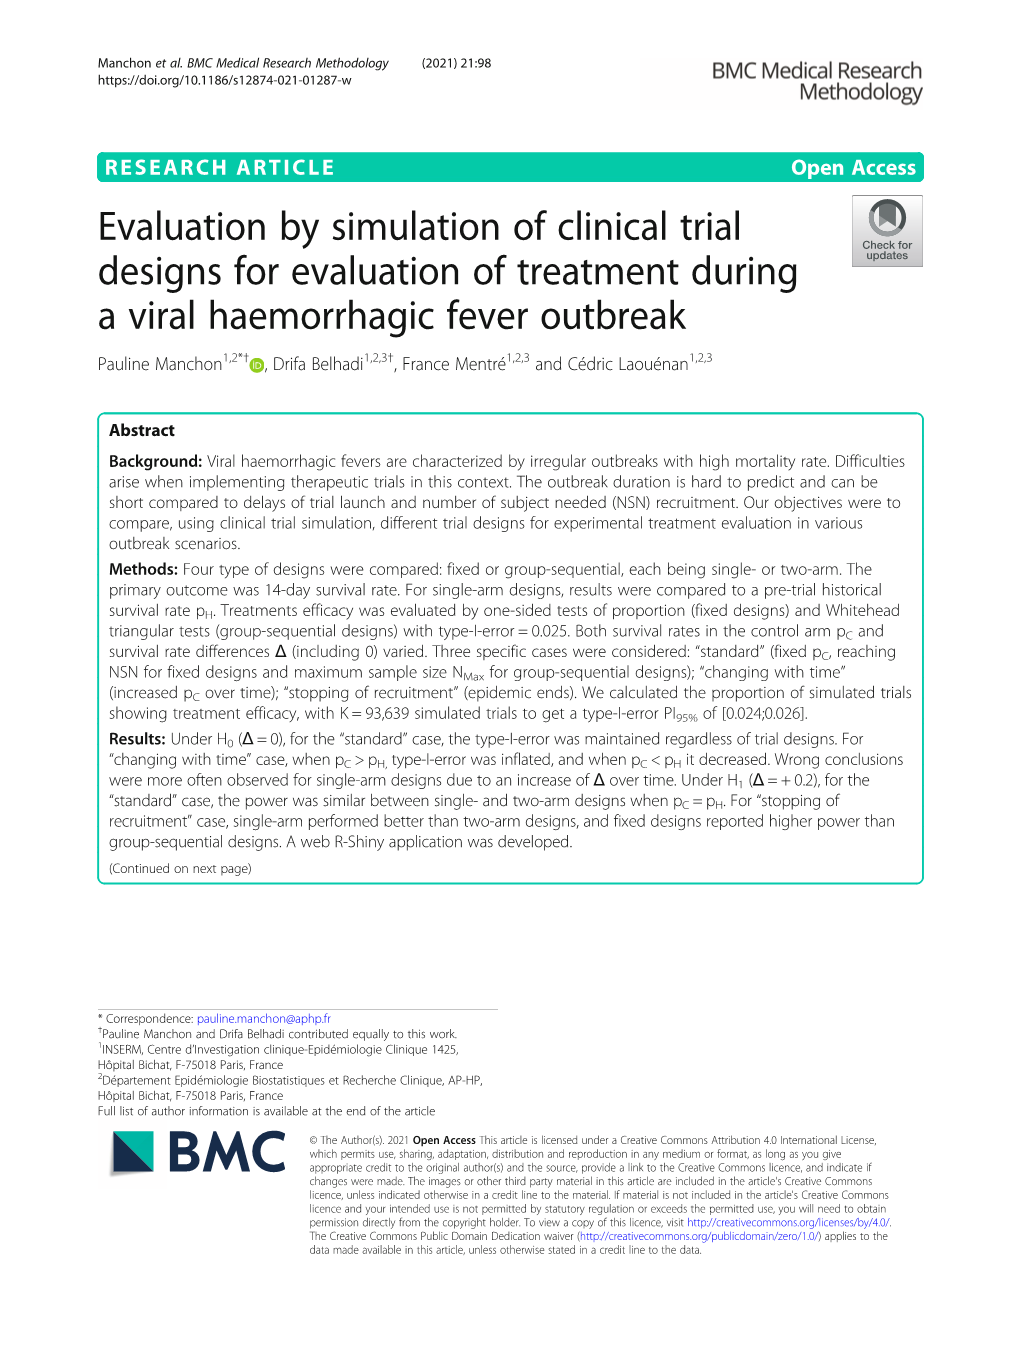 Evaluation by Simulation of Clinical Trial Designs for Evaluation Of